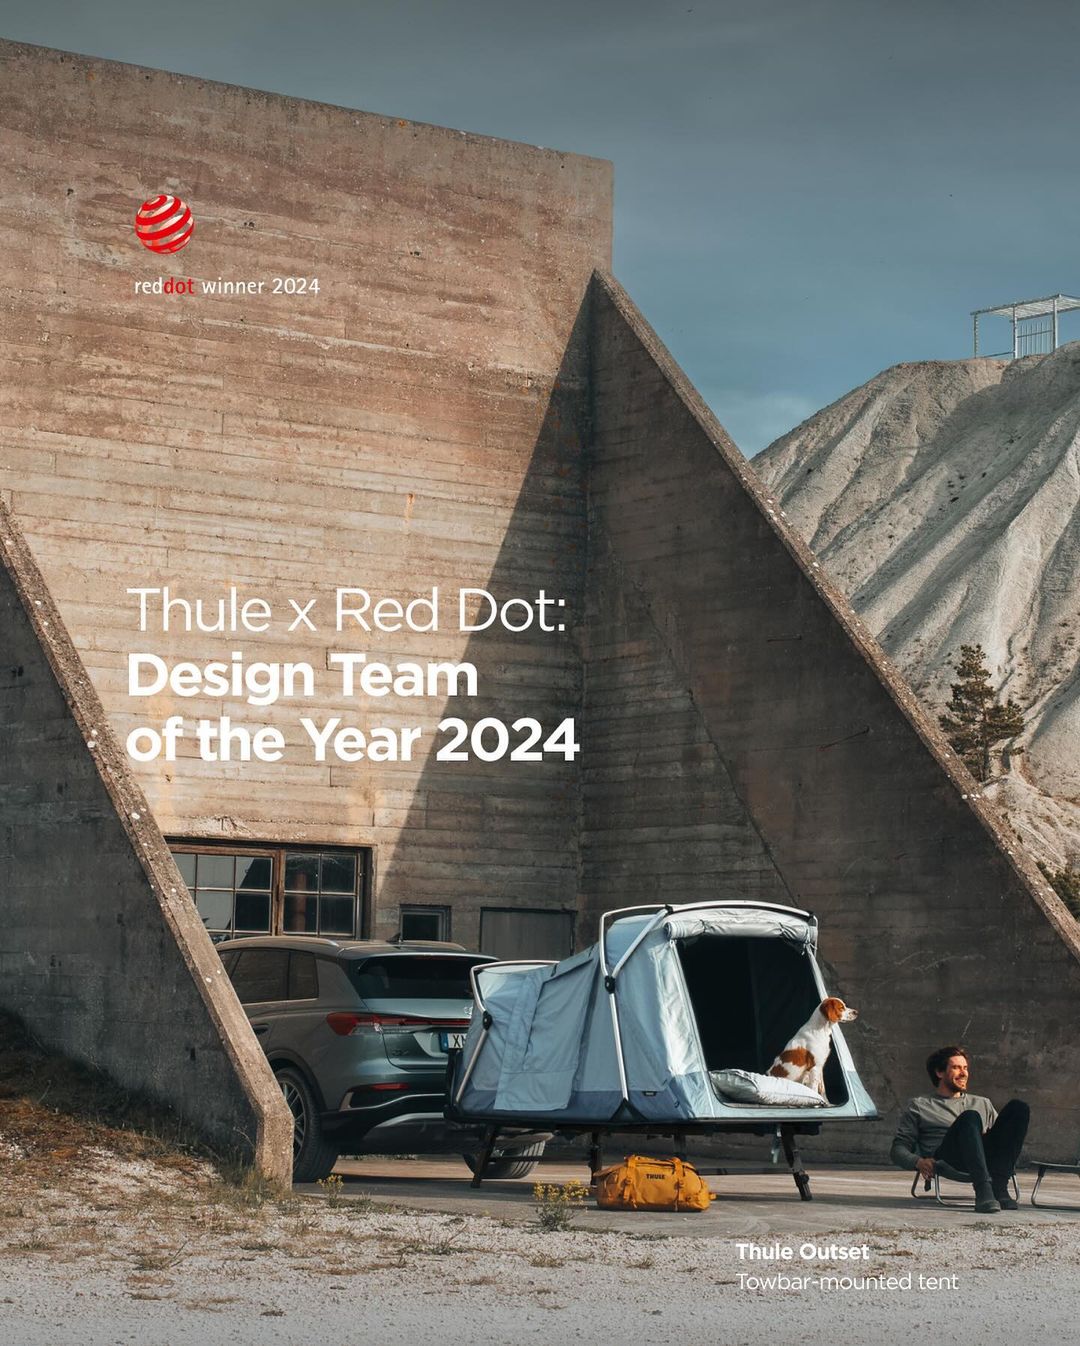 How Did Thule Earn the Prestigious Red Dot: Design Team of the Year Award?